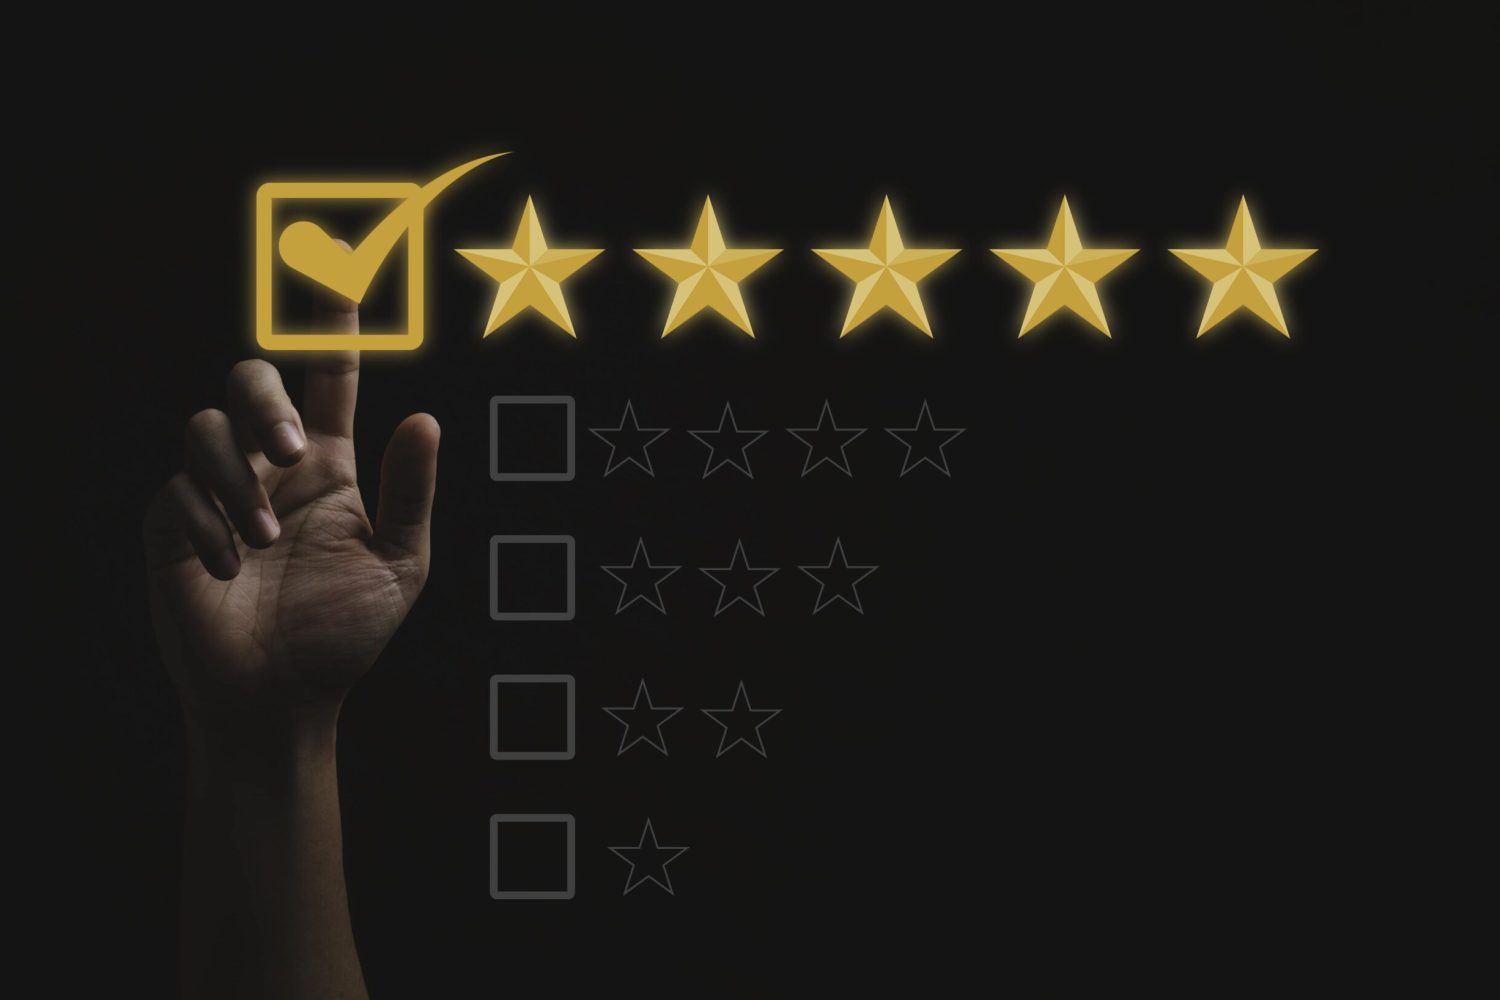 hand-touching-doing-mark-five-yellow-stars-black-background-best-customer-satisfaction-evaluation-good-quality-product-service-min